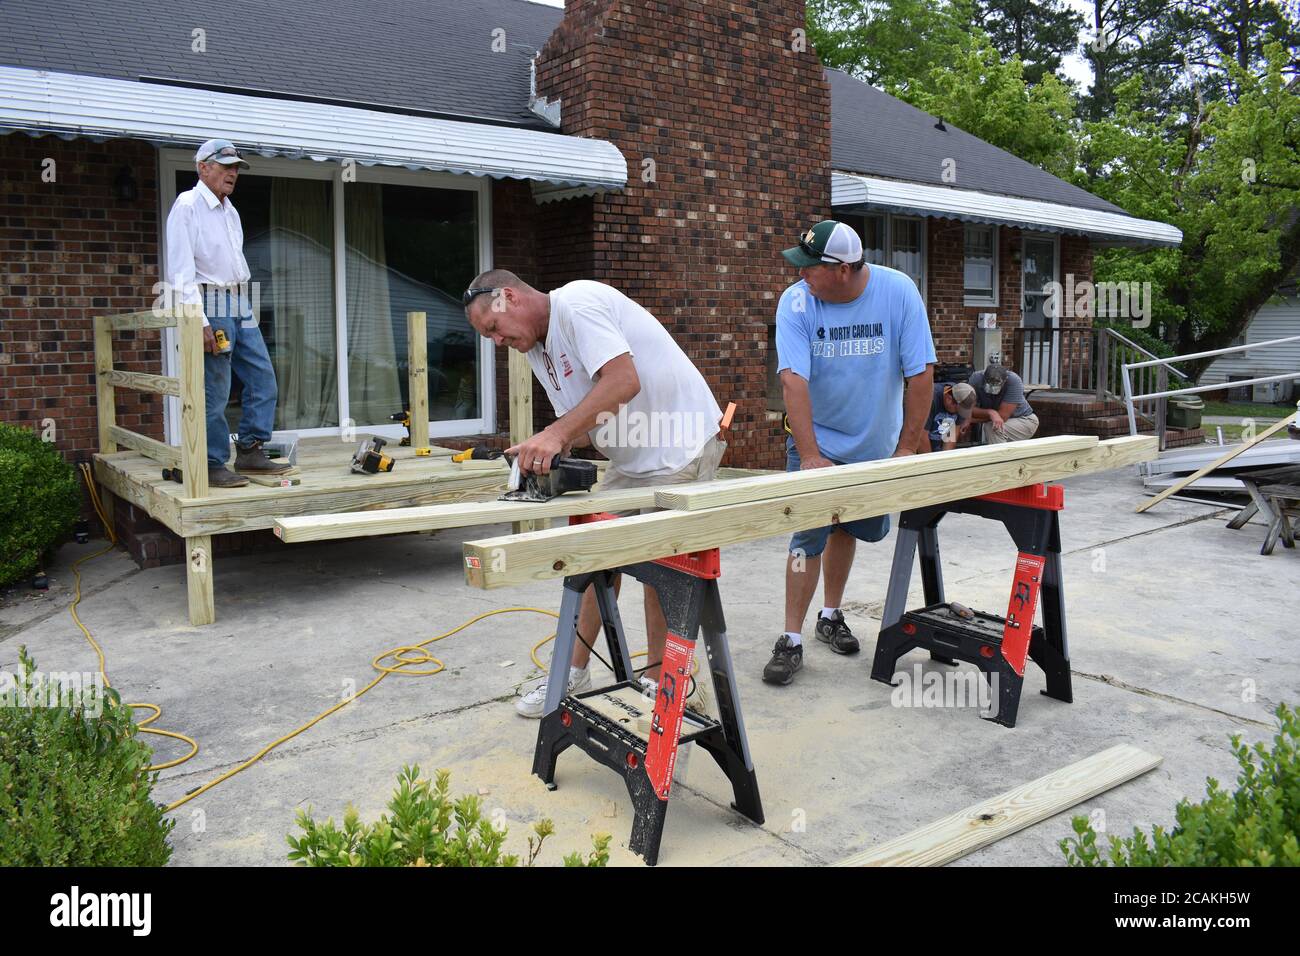 Construction of a Handicap Ramp to make the home wheelchair accessible. Stock Photo